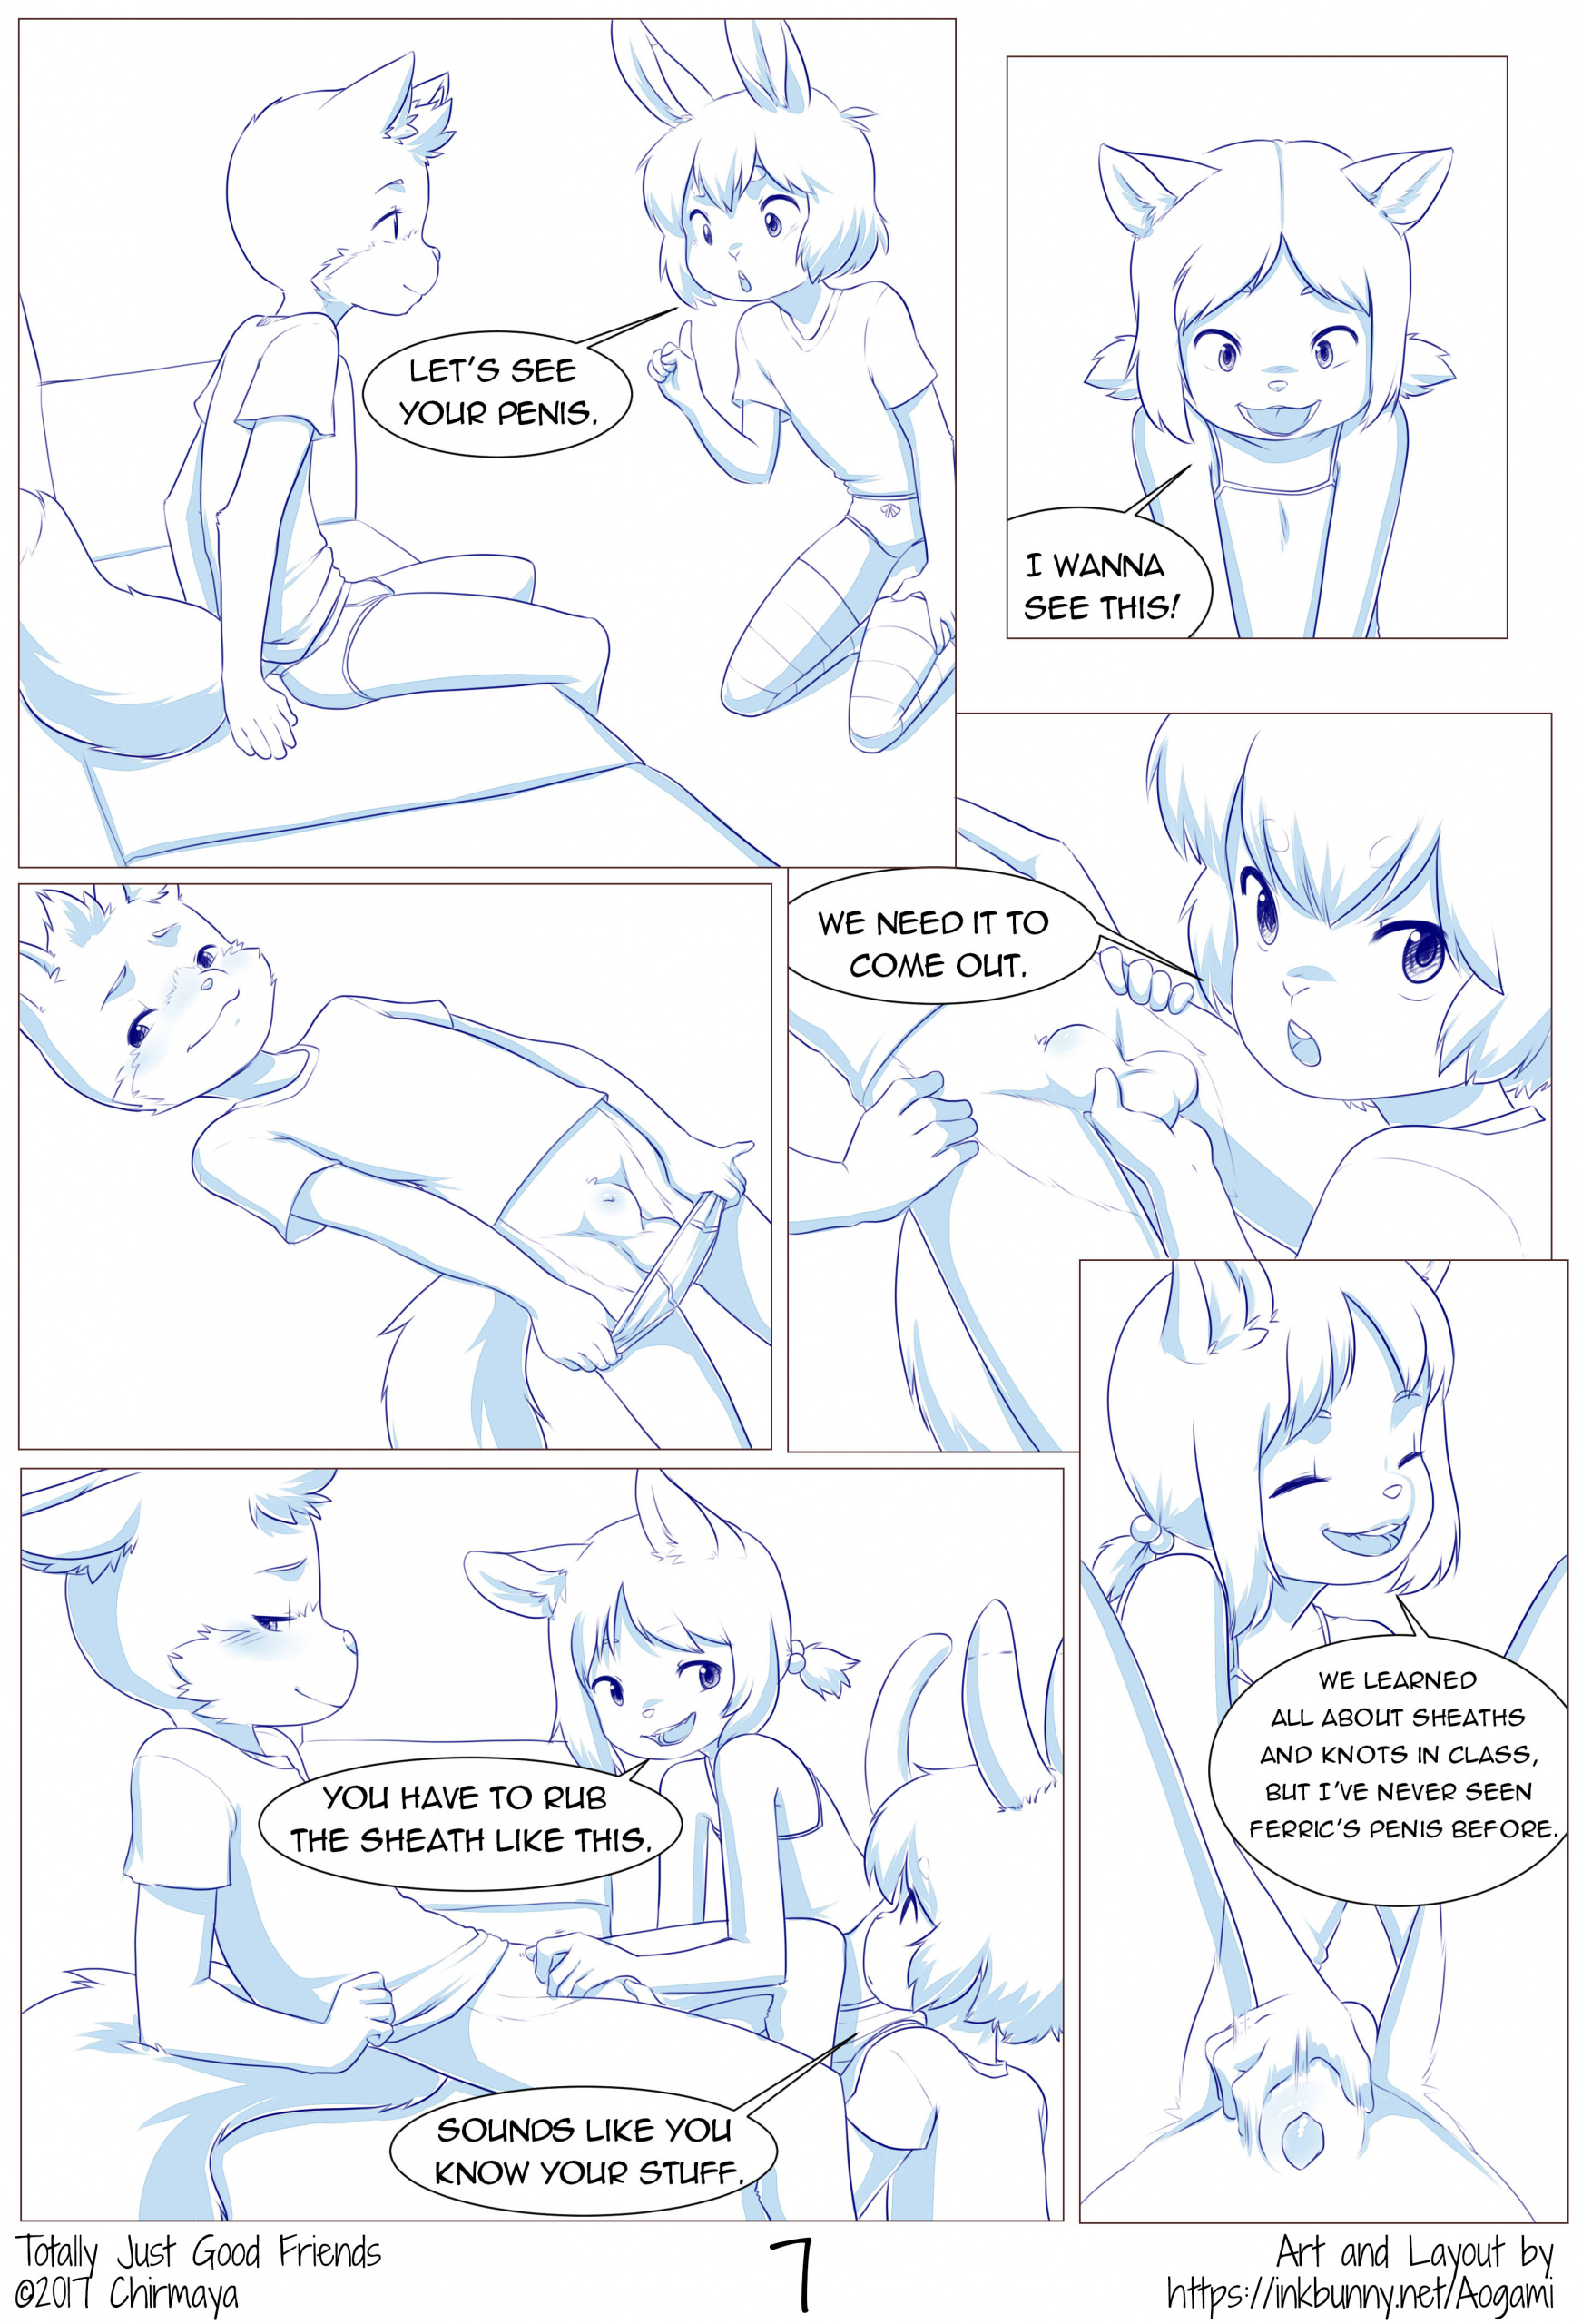 Totally Just Good Friends porn comics Oral sex, Anal Sex, Blowjob, Creampie, Cum Swallow, cunnilingus, Double Penetration, fingering, Furry, Gangbang, Group Sex, Lesbians, Lolicon, Masturbation, Sex Toys, Stockings, Straight, Straight Shota, Threesome, Virgin, X-Ray